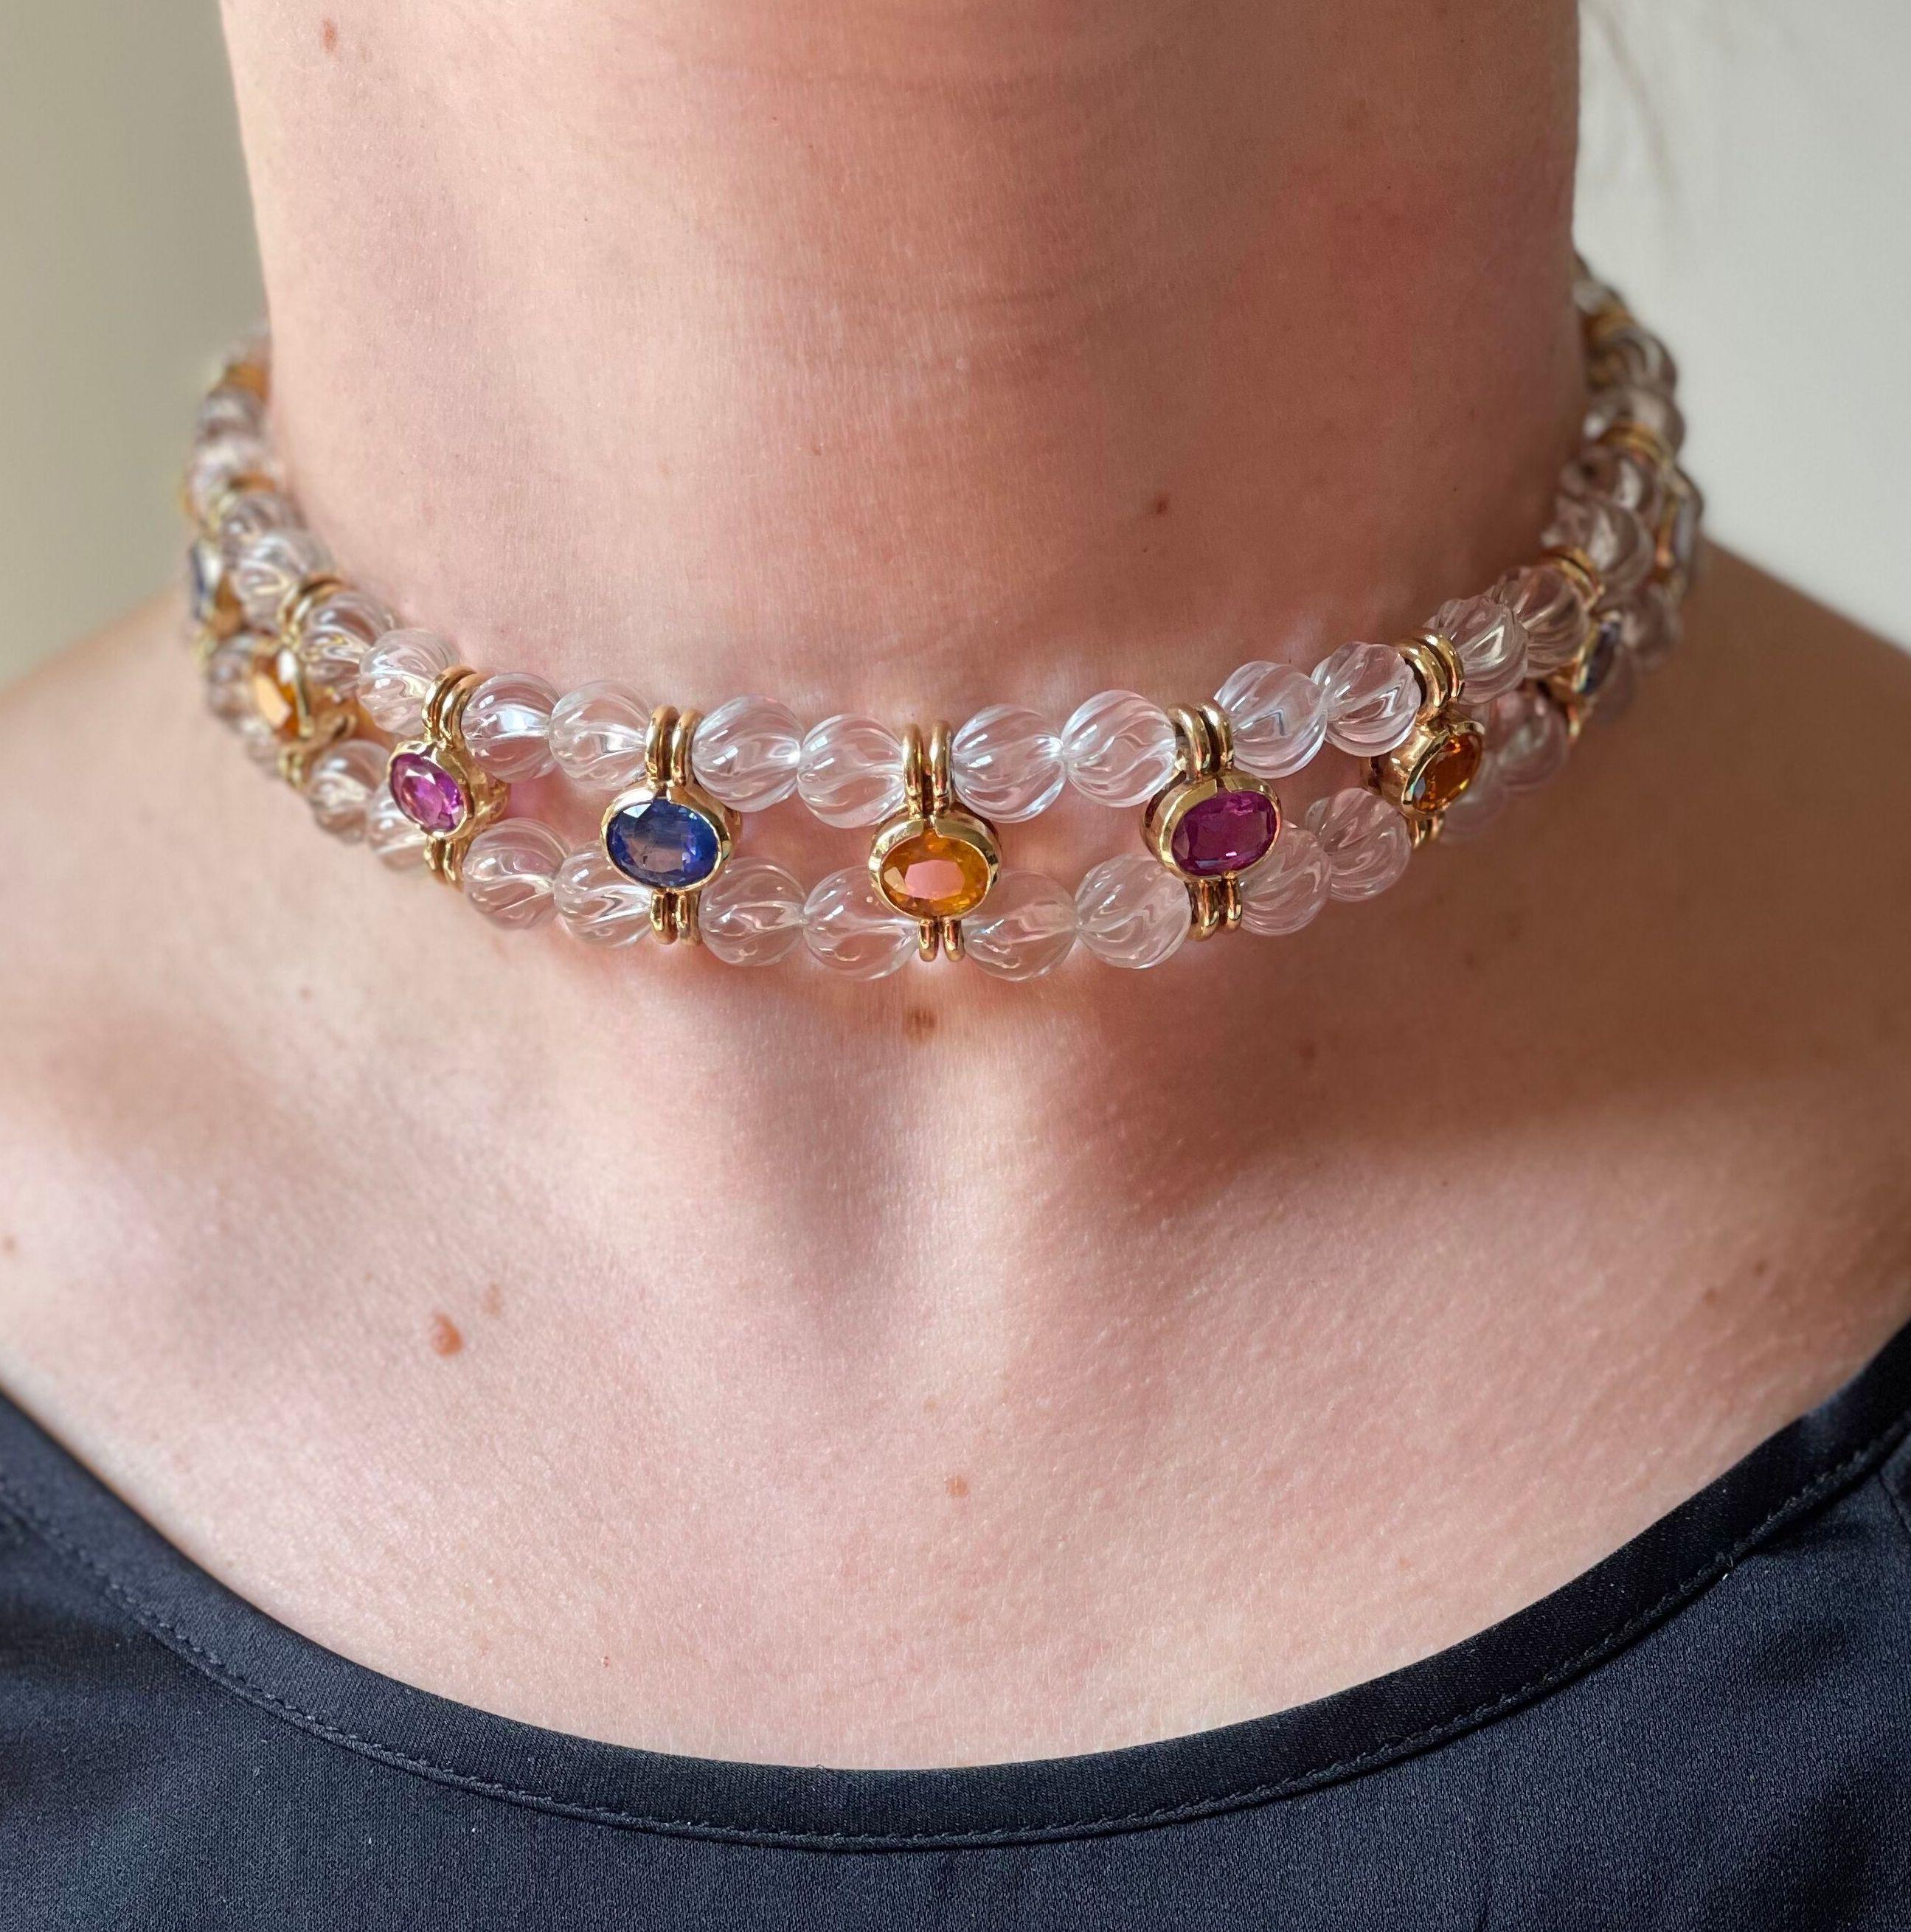 Vintage Bvlgari choker necklace in 18k gold, with carved crystal beads and multi color vibrant sapphires. Necklace is 15